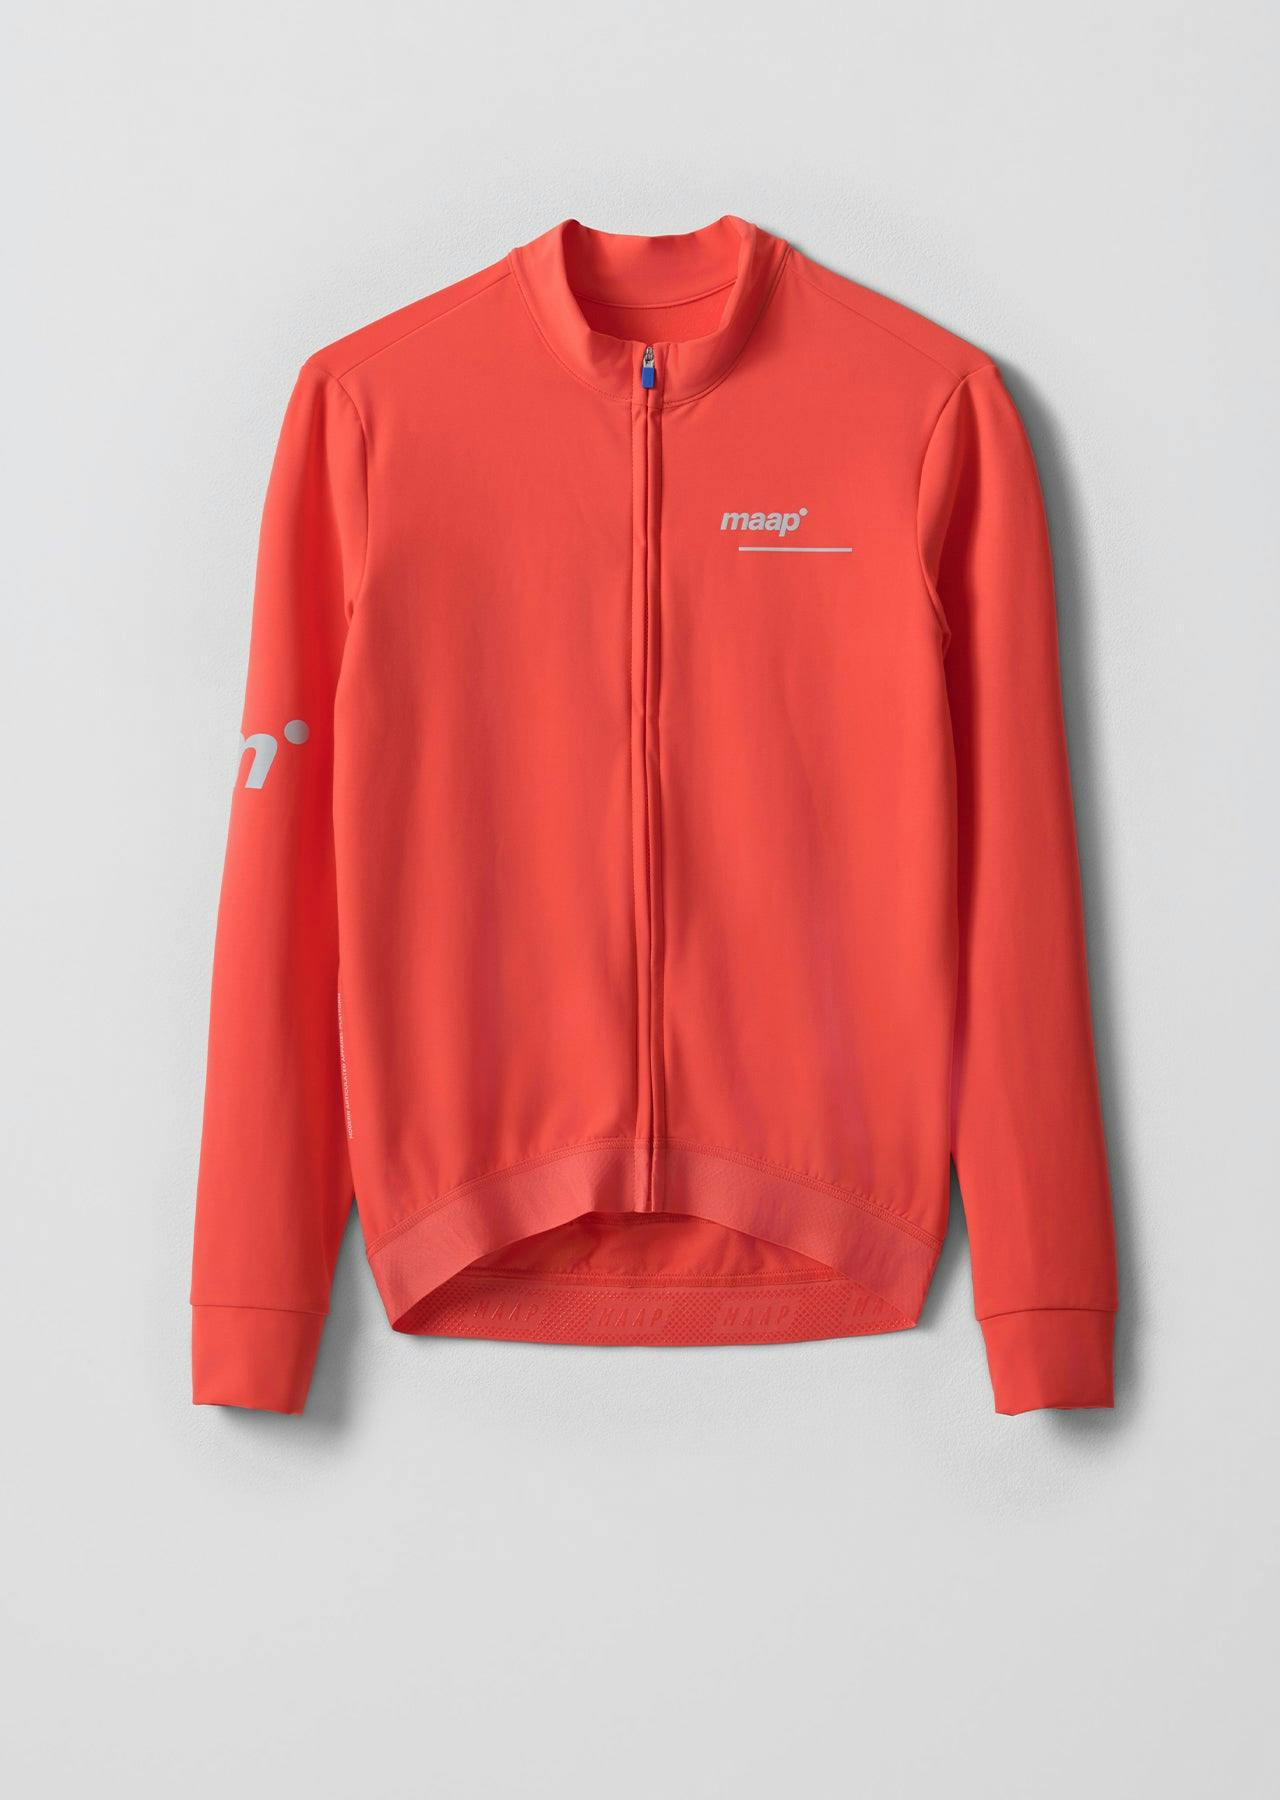 Thermal Training LS Jersey